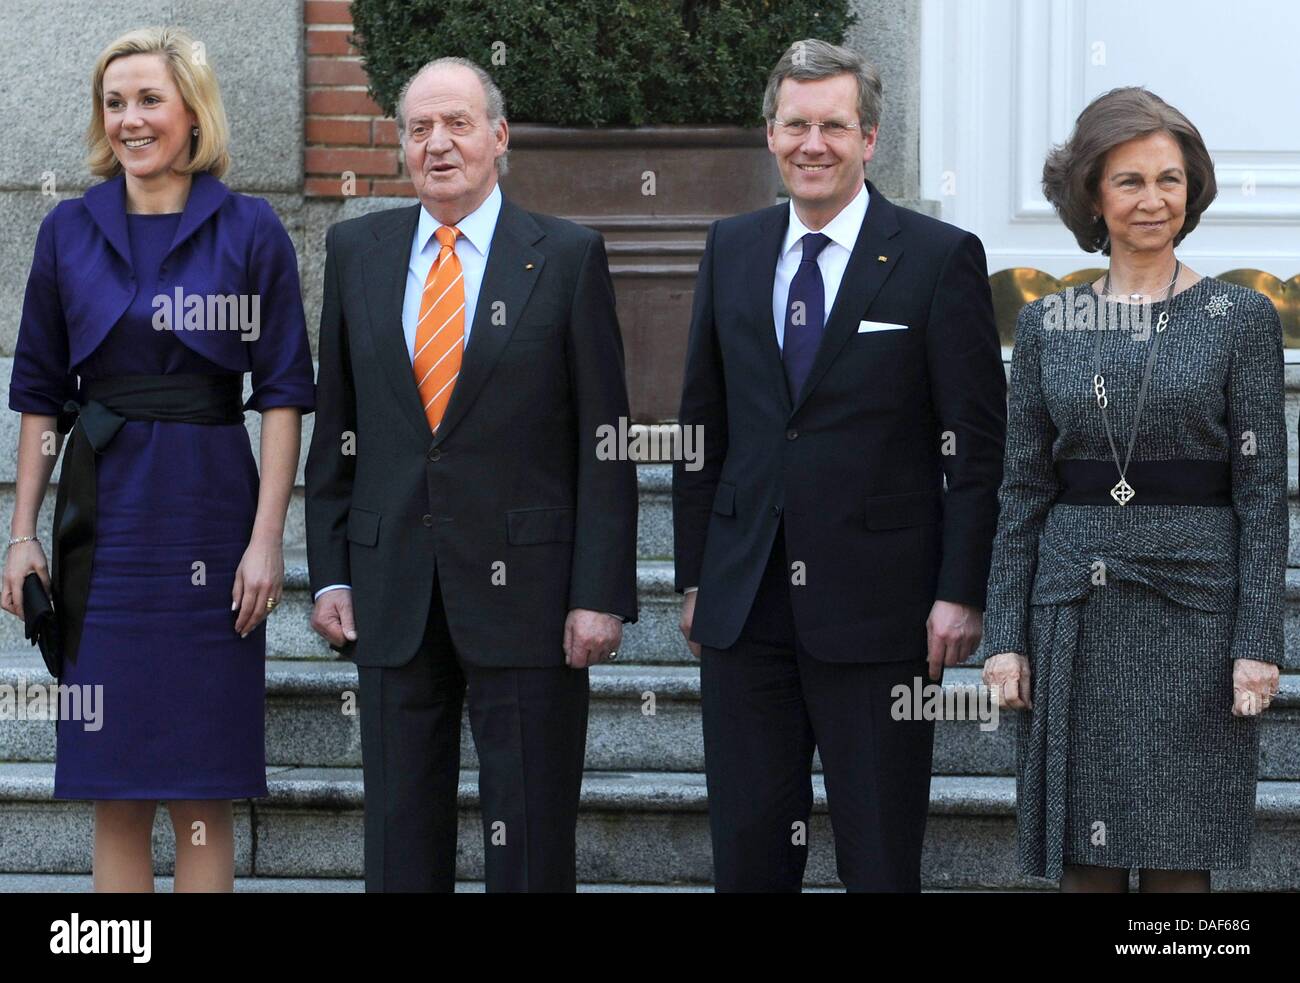 King Juan Carlos of Spain (2-L) and Queen Sofia of Spain (R) welcomes German President Christian Wulff (2-R) and his wife  Bettina Wulff (L) at Zarzuela in Madrid, Spain, 10 February 2011. Mr Wulff is on inaugural visit to spain and Portugal until 11 February. Photo: RAINER JENSEN Stock Photo